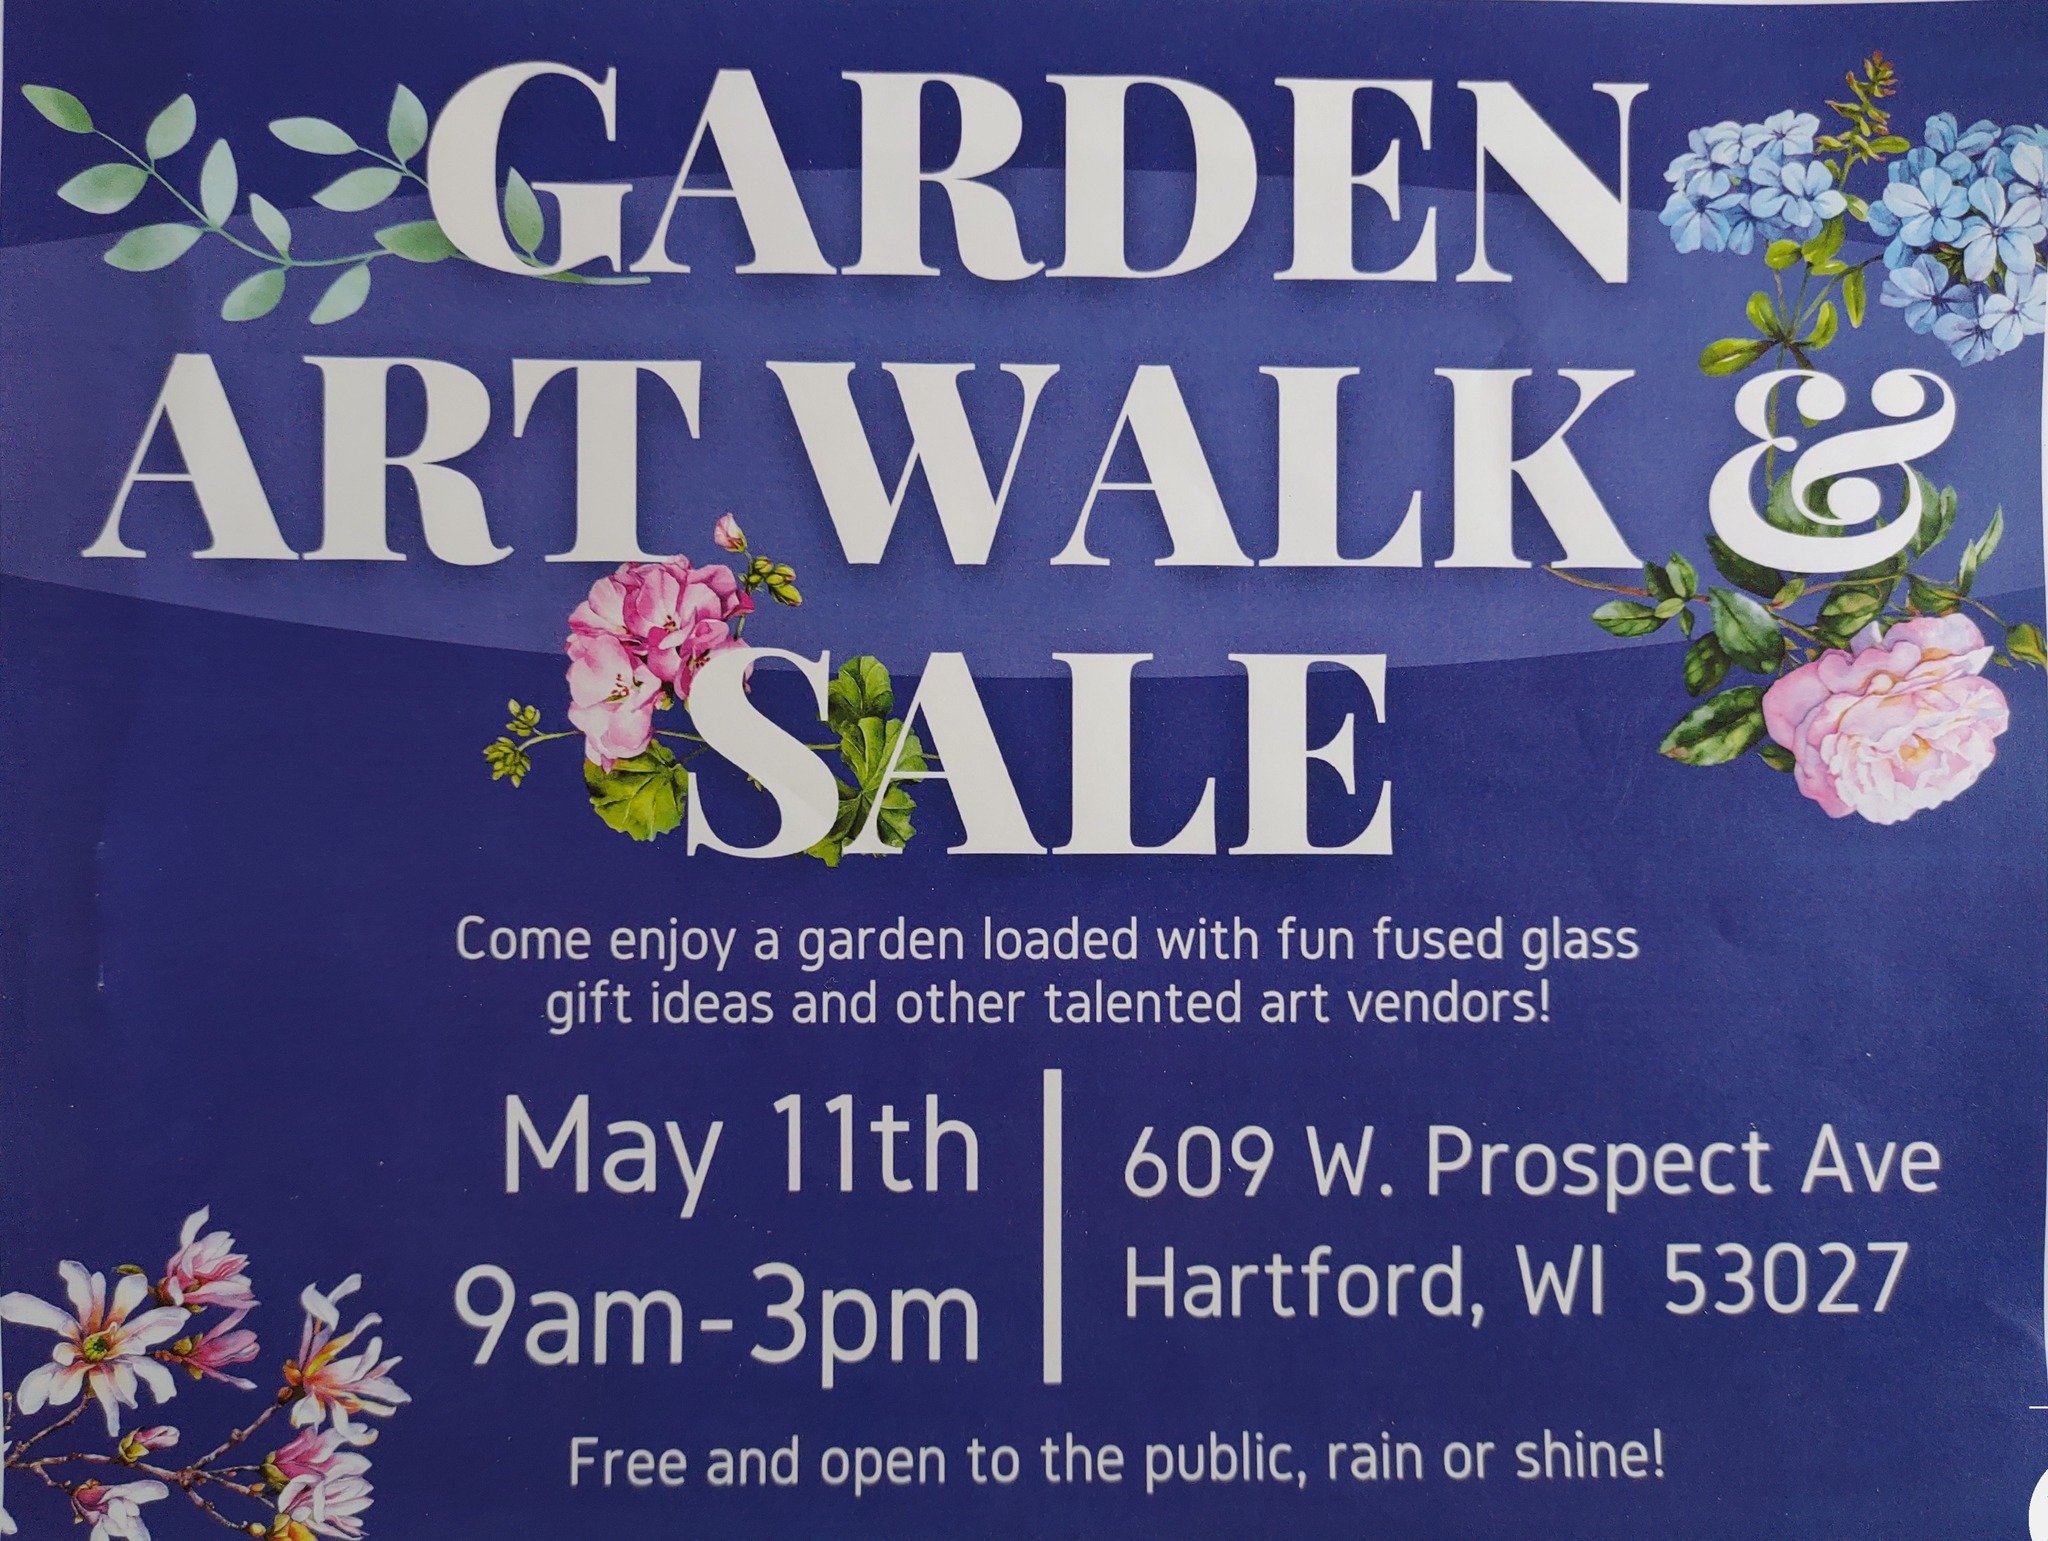 We are counting down the days for this event! Excited to be back in Hartford for the day and it is a rain or shine event! There will be a lot of beautiful things to look at and wonderful artisans to support! Come out and see us!

We will have our art